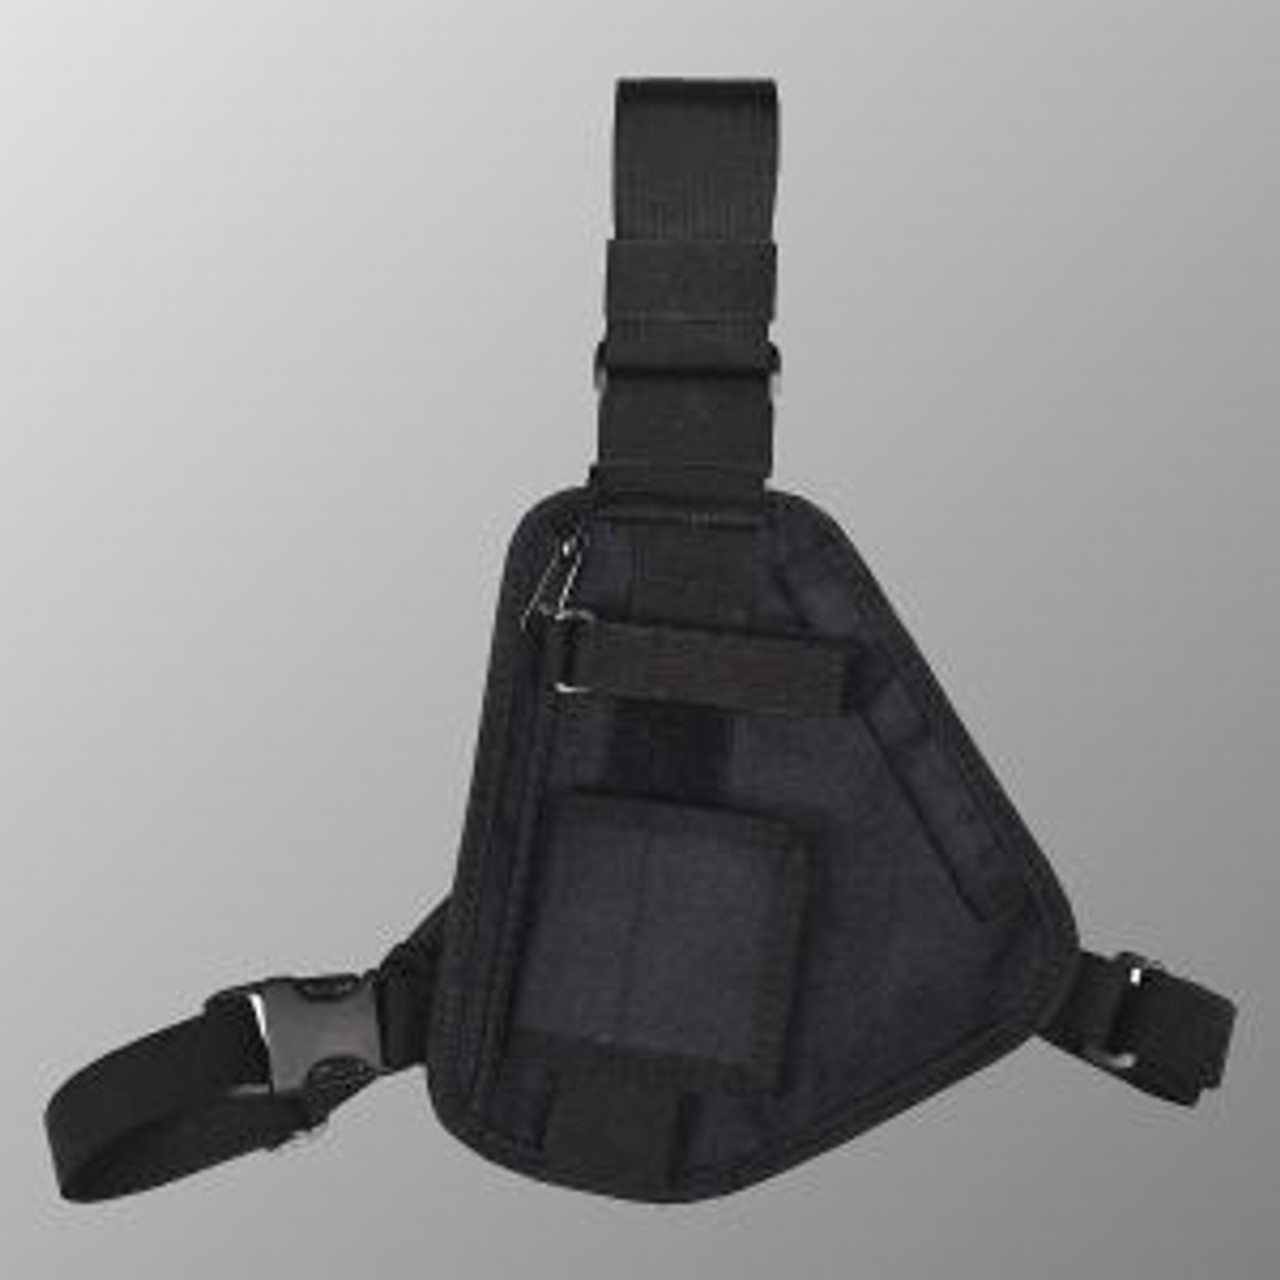 Kenwood NX-200 3-Point Chest Harness - Black